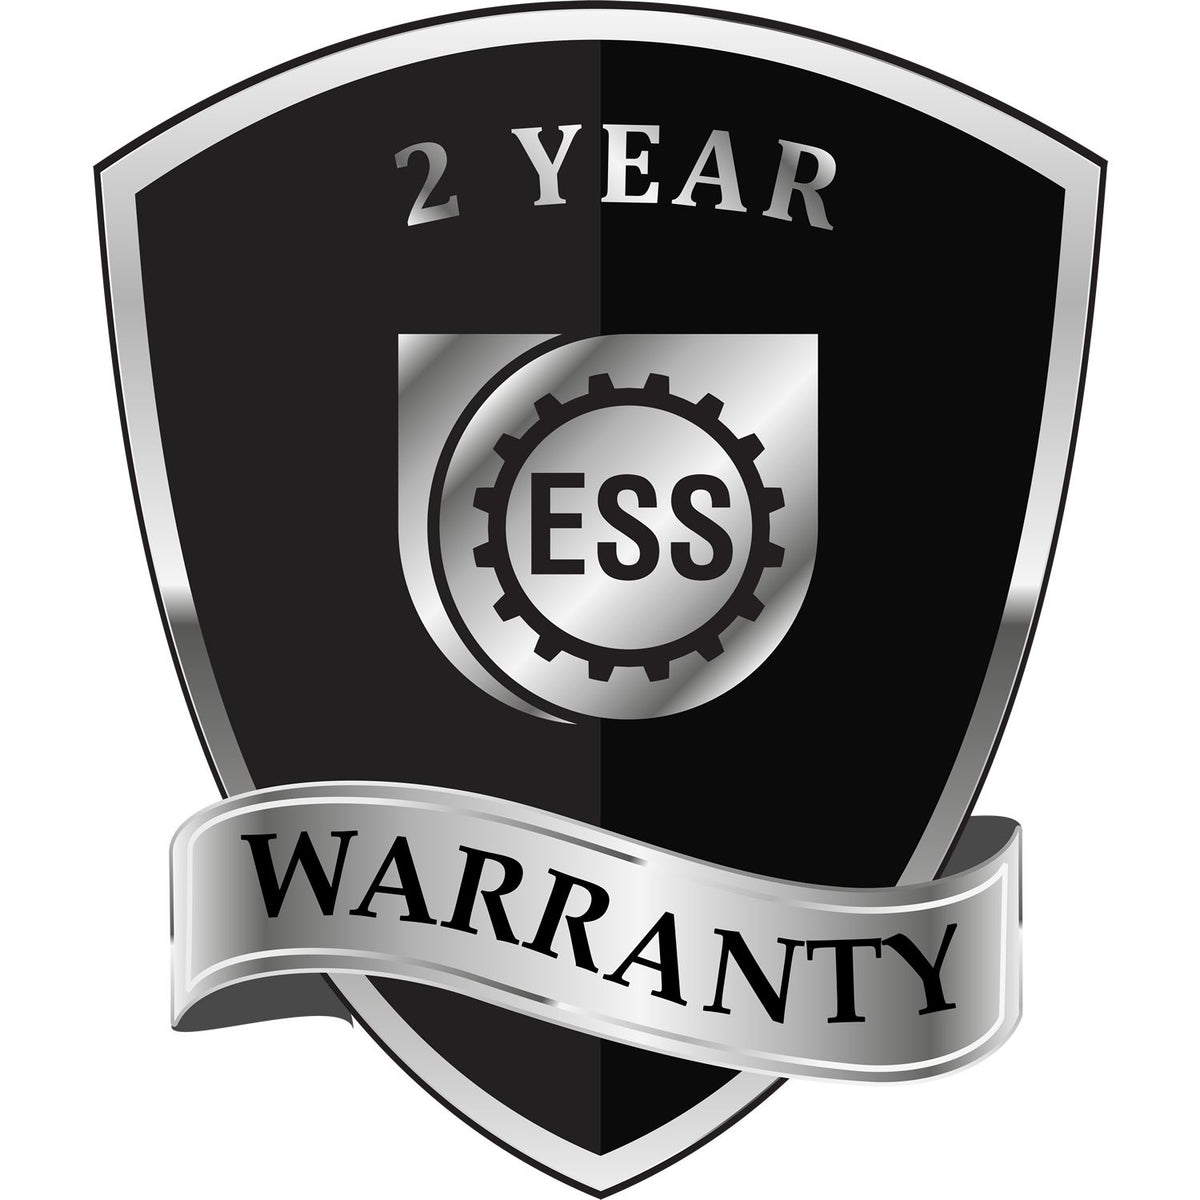 A black and silver badge or emblem showing warranty information for the Hybrid New Mexico Engineer Seal